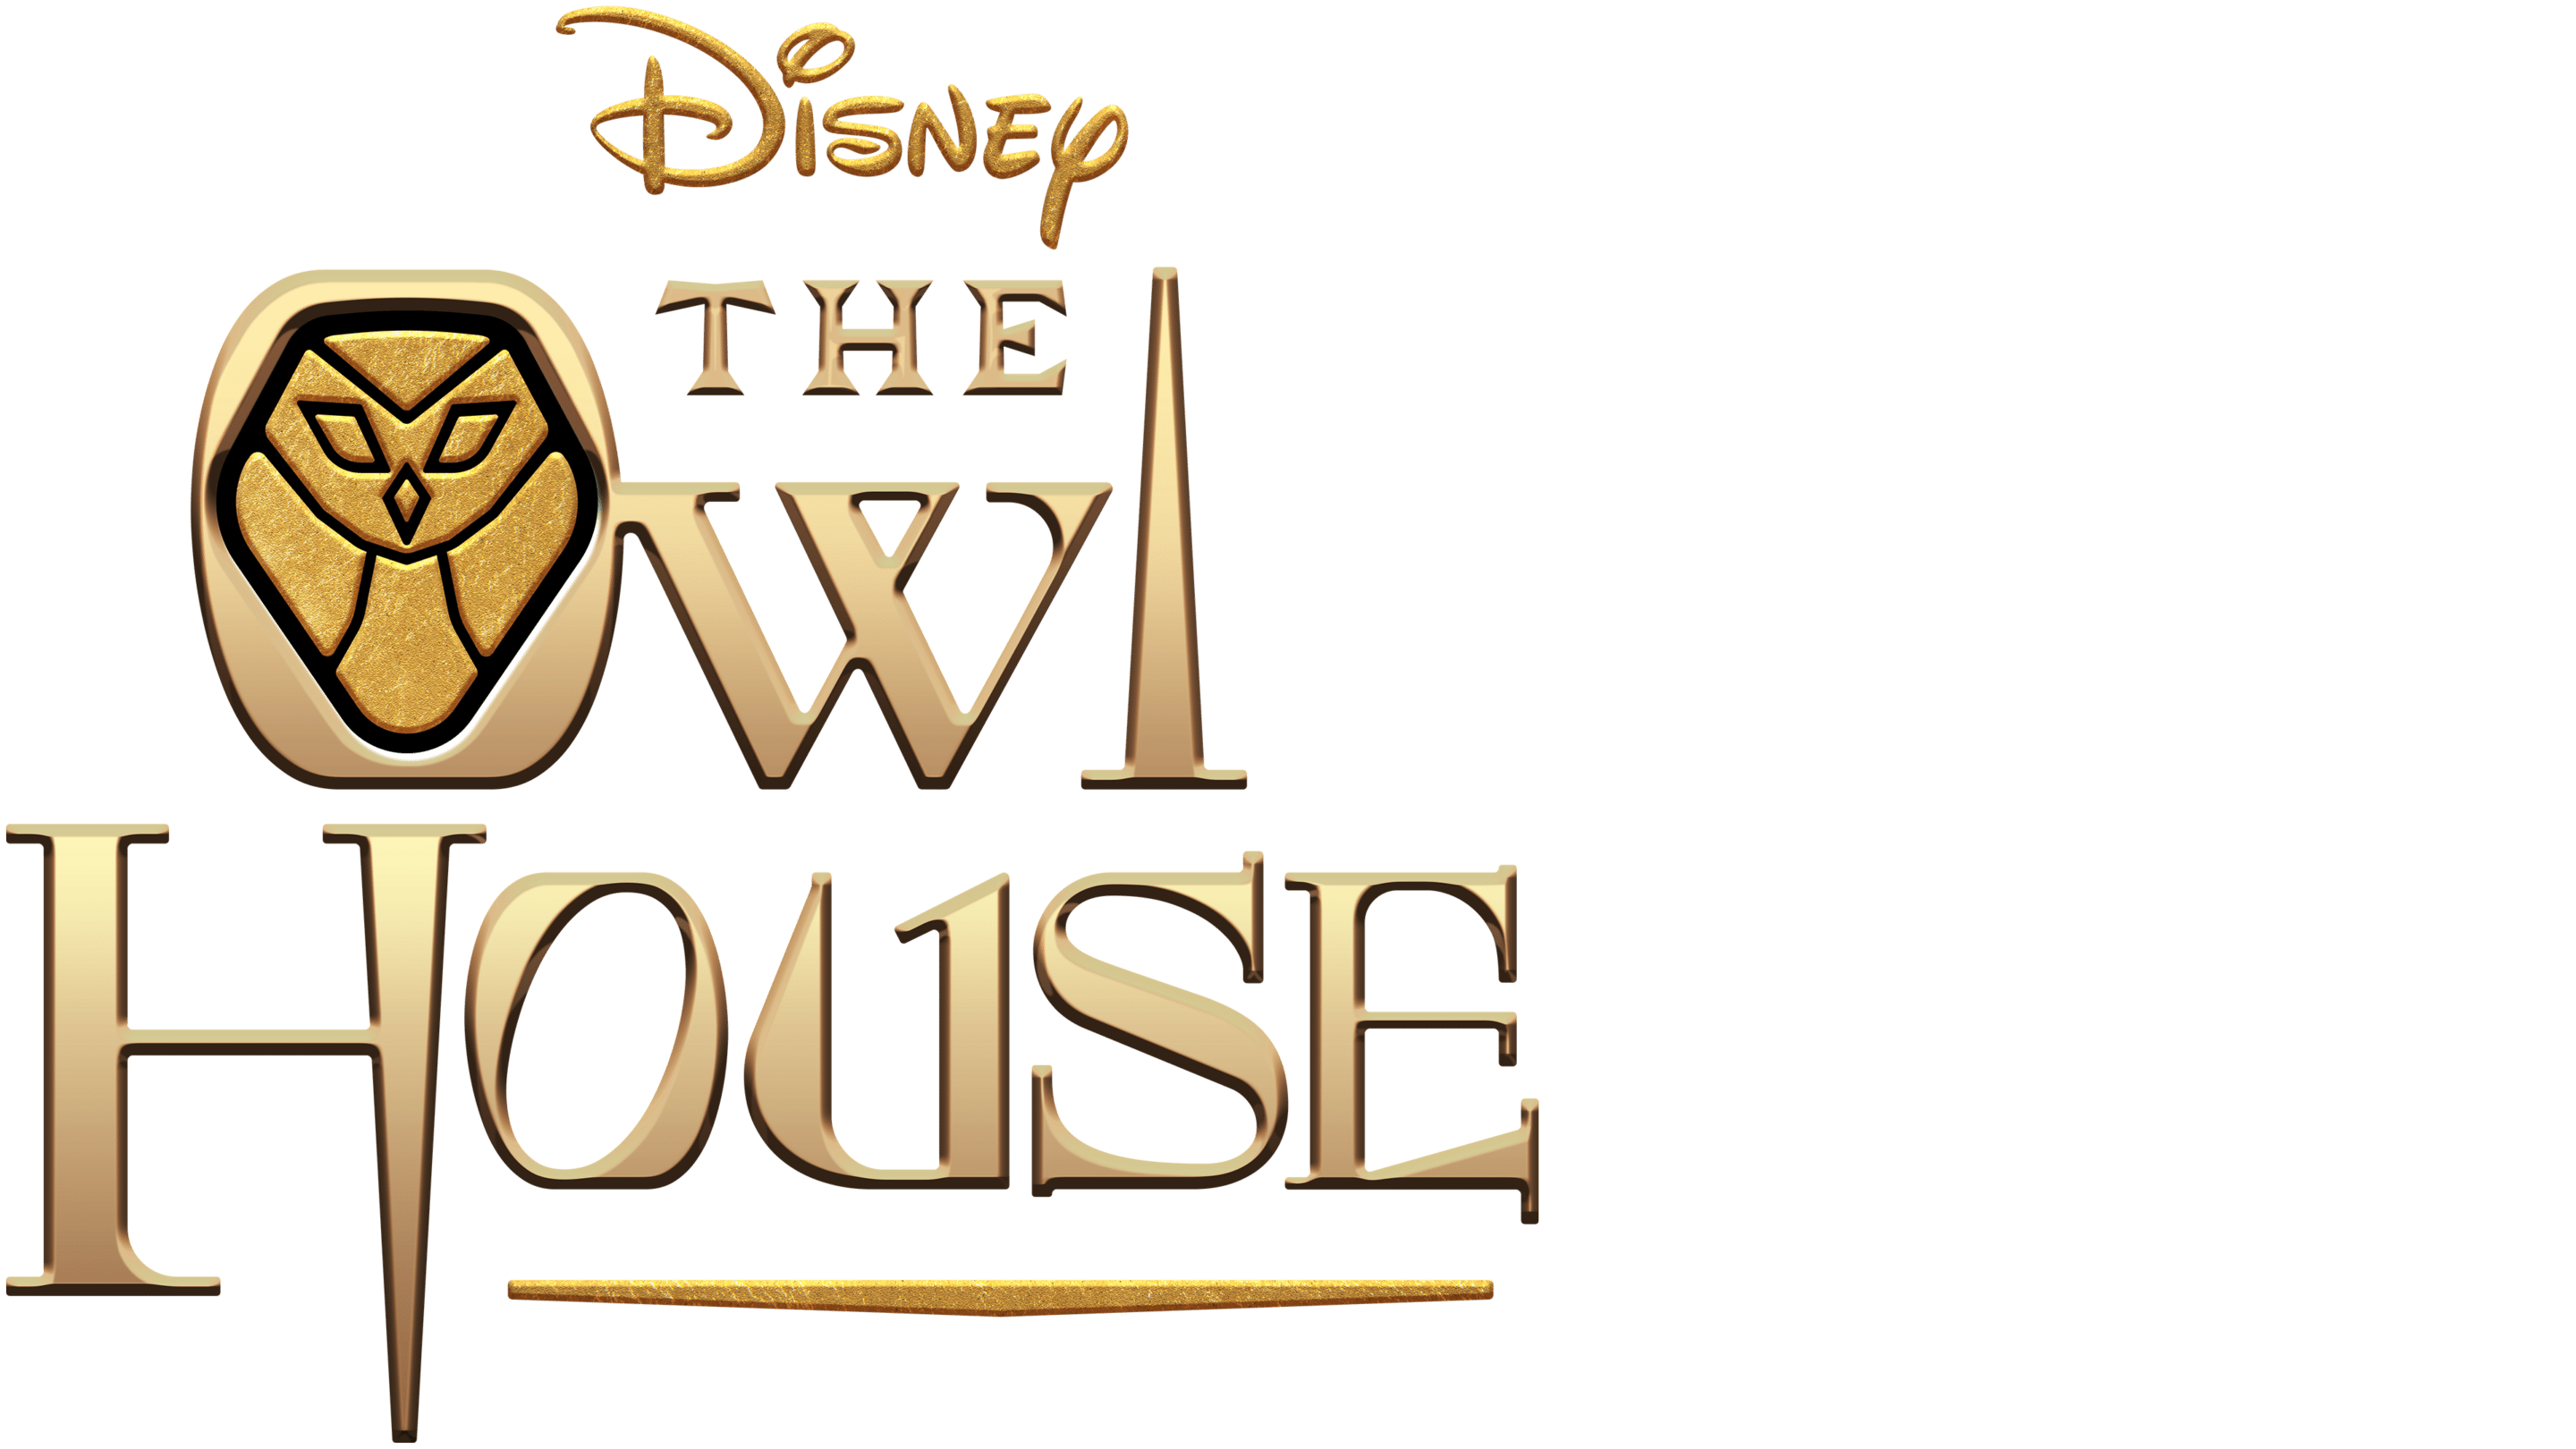 The Owl House Season 3 - watch episodes streaming online